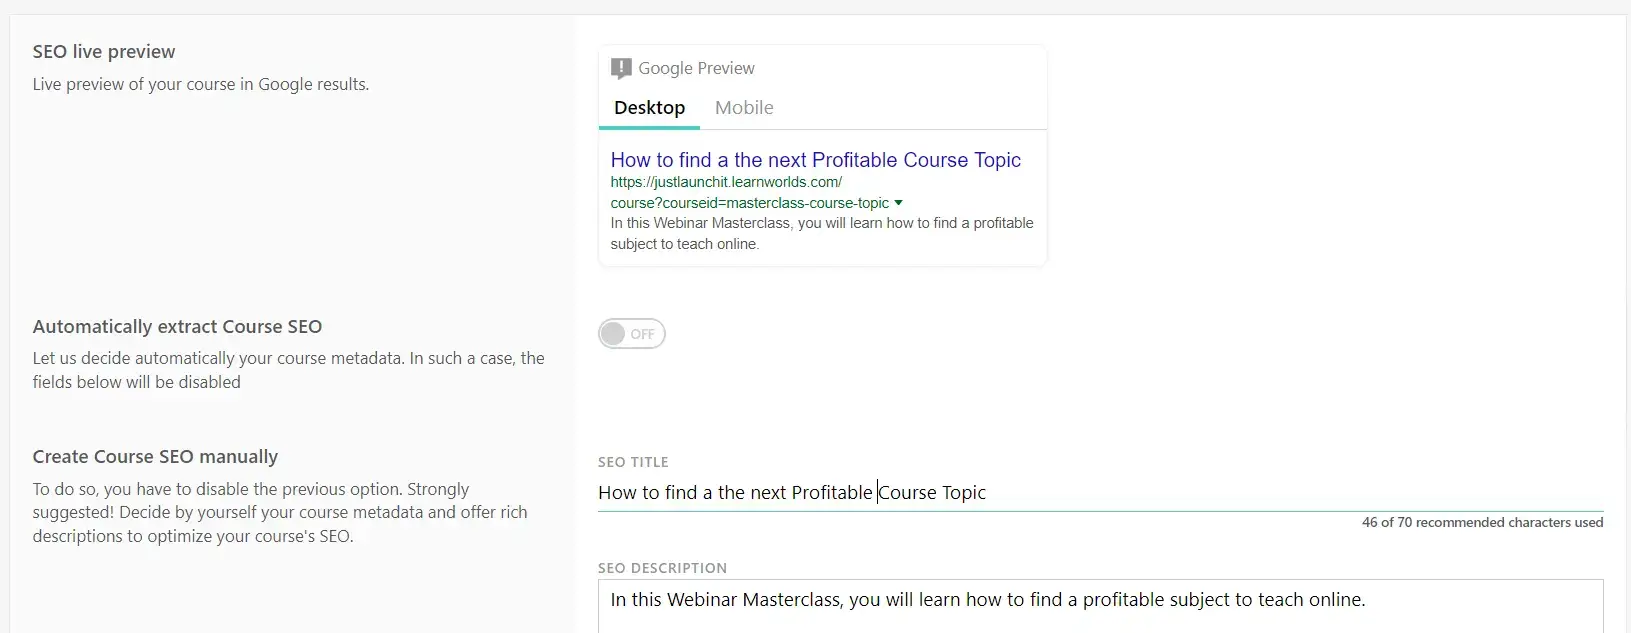 Screenshot of LearnWorlds' meta description and meta title, automatic extraction of SEO and search engine live preview.